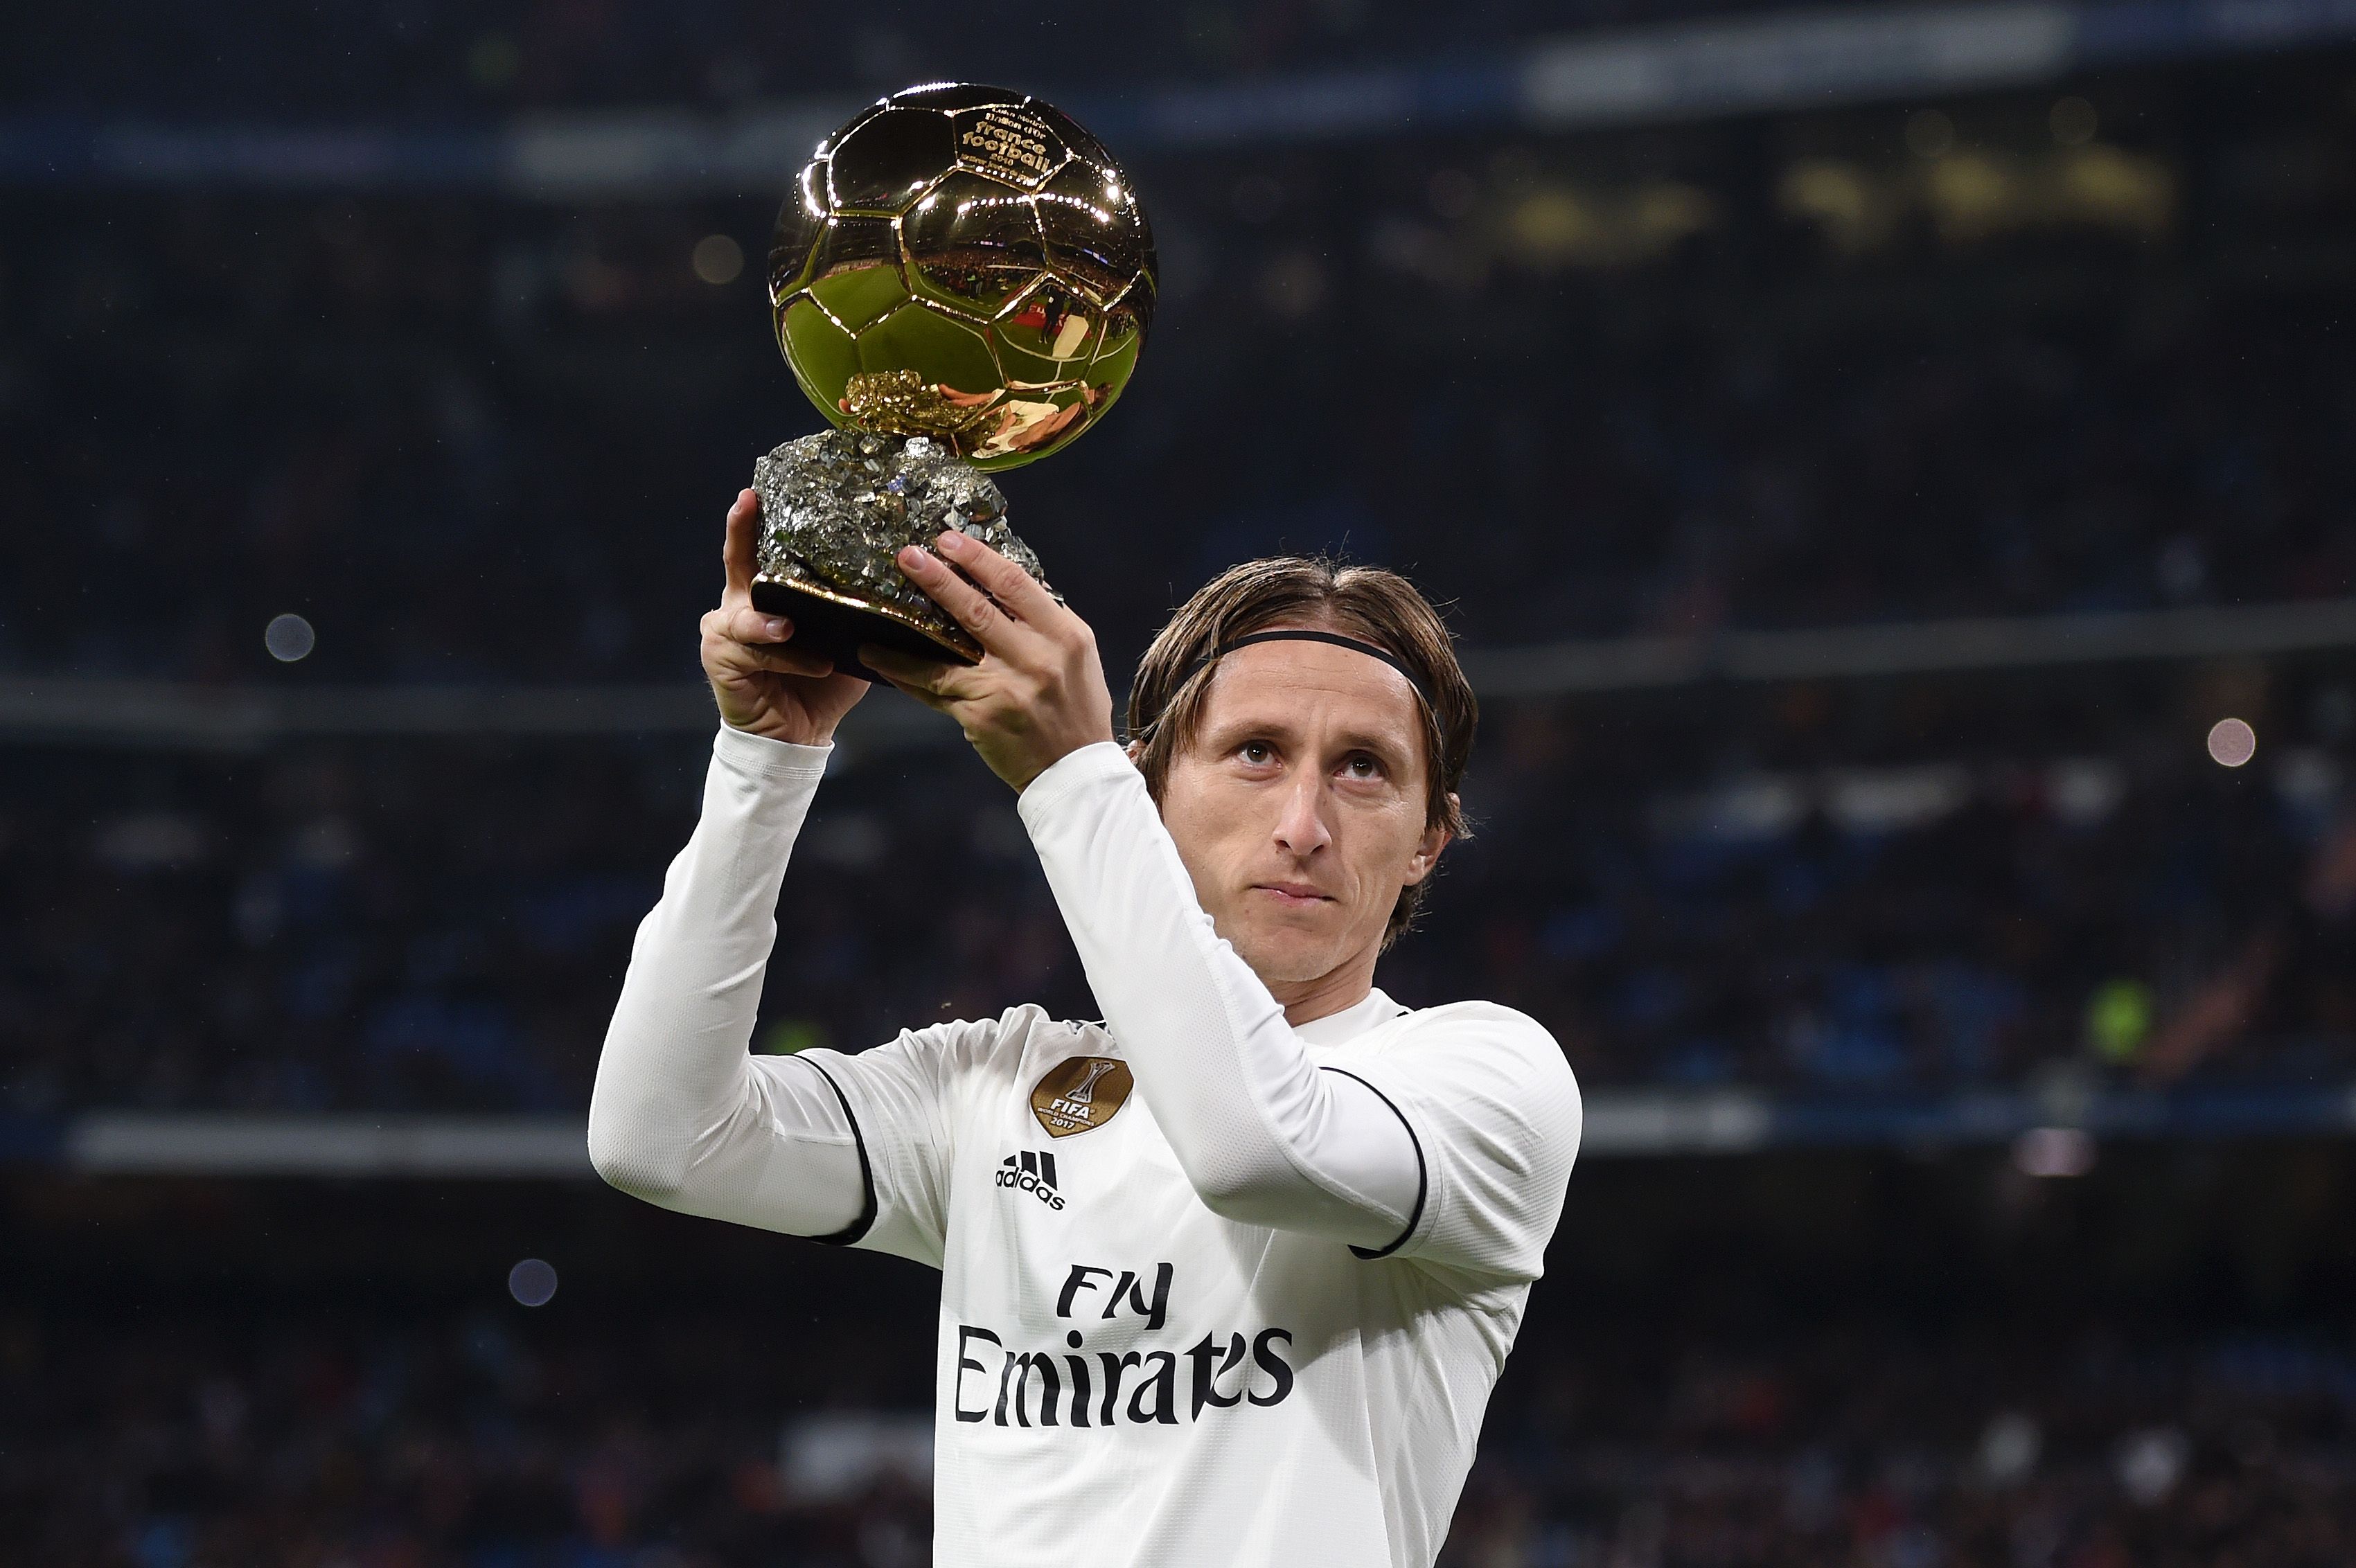 Luka Modric of Real Madrid presents his Ballon d'Or Trophy to the crowd